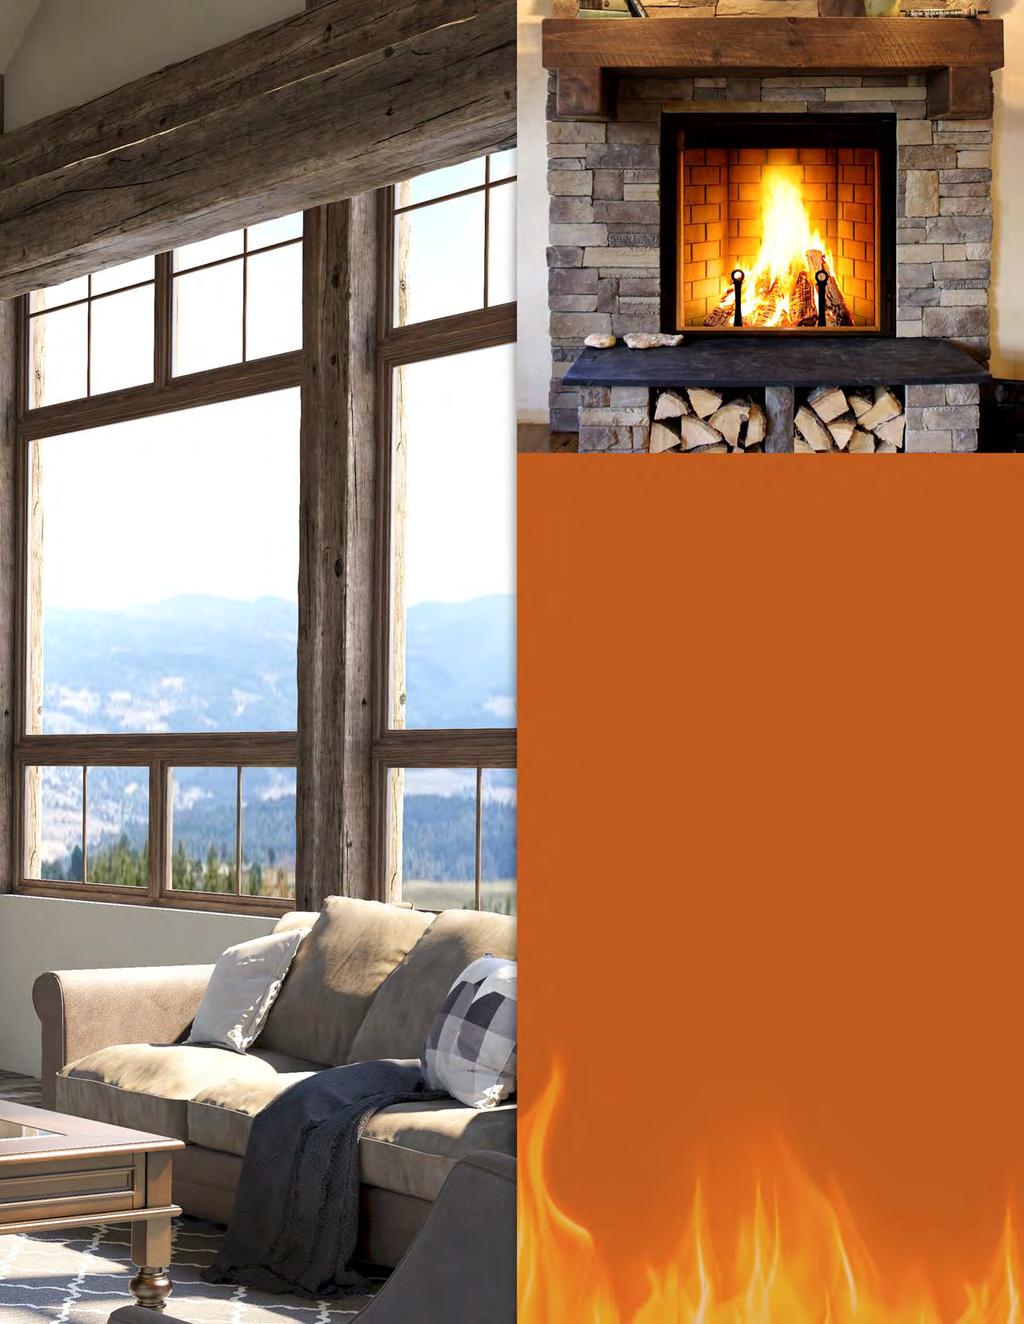 Rumford 1500 The Renaissance Rumford 1500 is the largest of our patented fireplace designs.